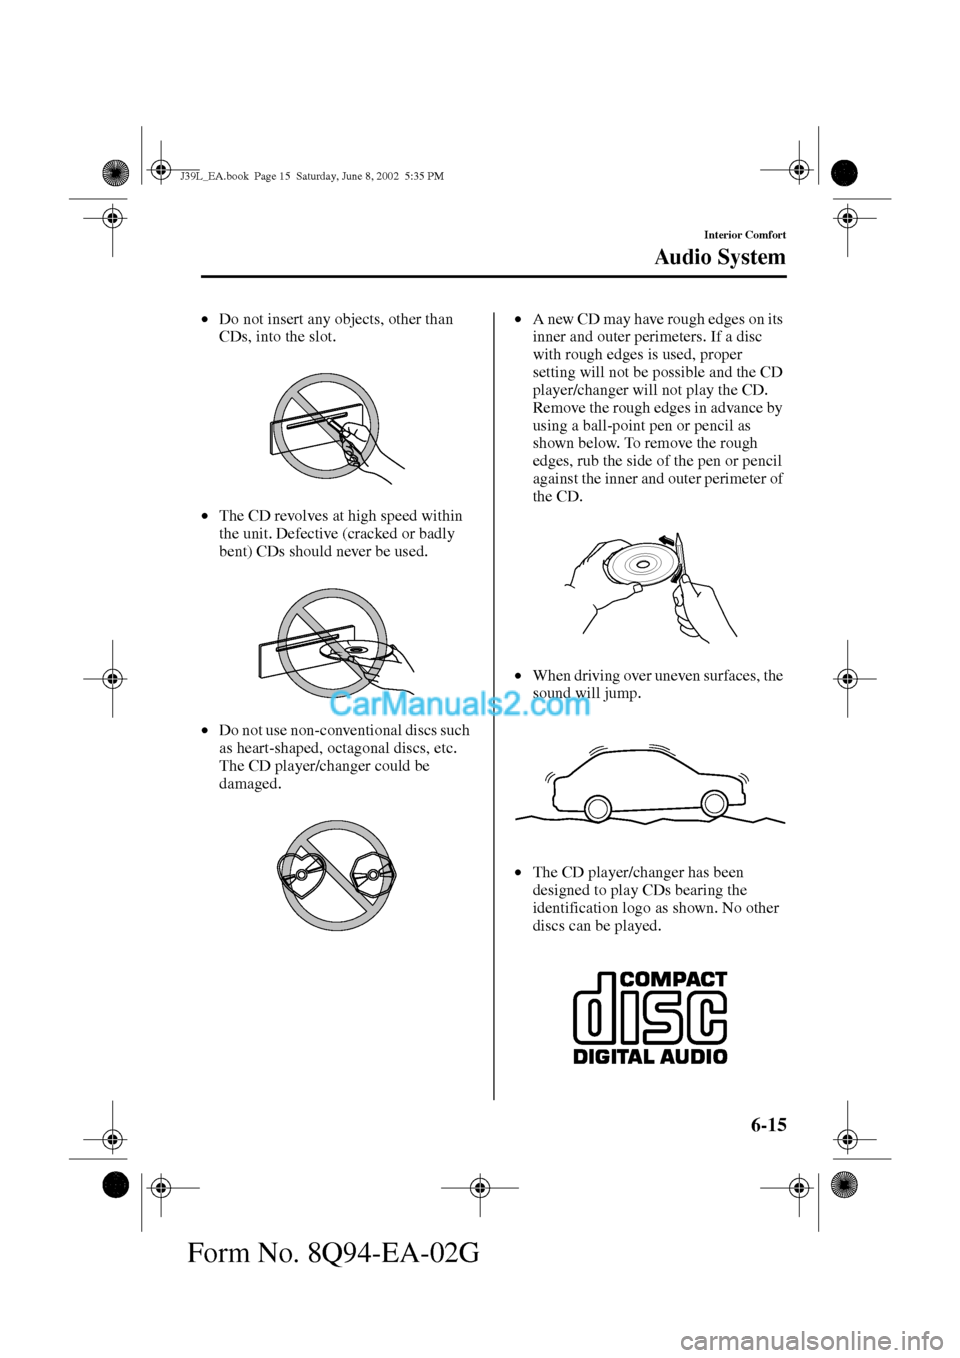 MAZDA MODEL PROTÉGÉ 2003  Owners Manual (in English) 6-15
Interior Comfort
Au di o S ys t em
Form No. 8Q94-EA-02G
•Do not insert any objects, other than 
CDs, into the slot.
•The CD revolves at high speed within 
the unit. Defective (cracked or badl